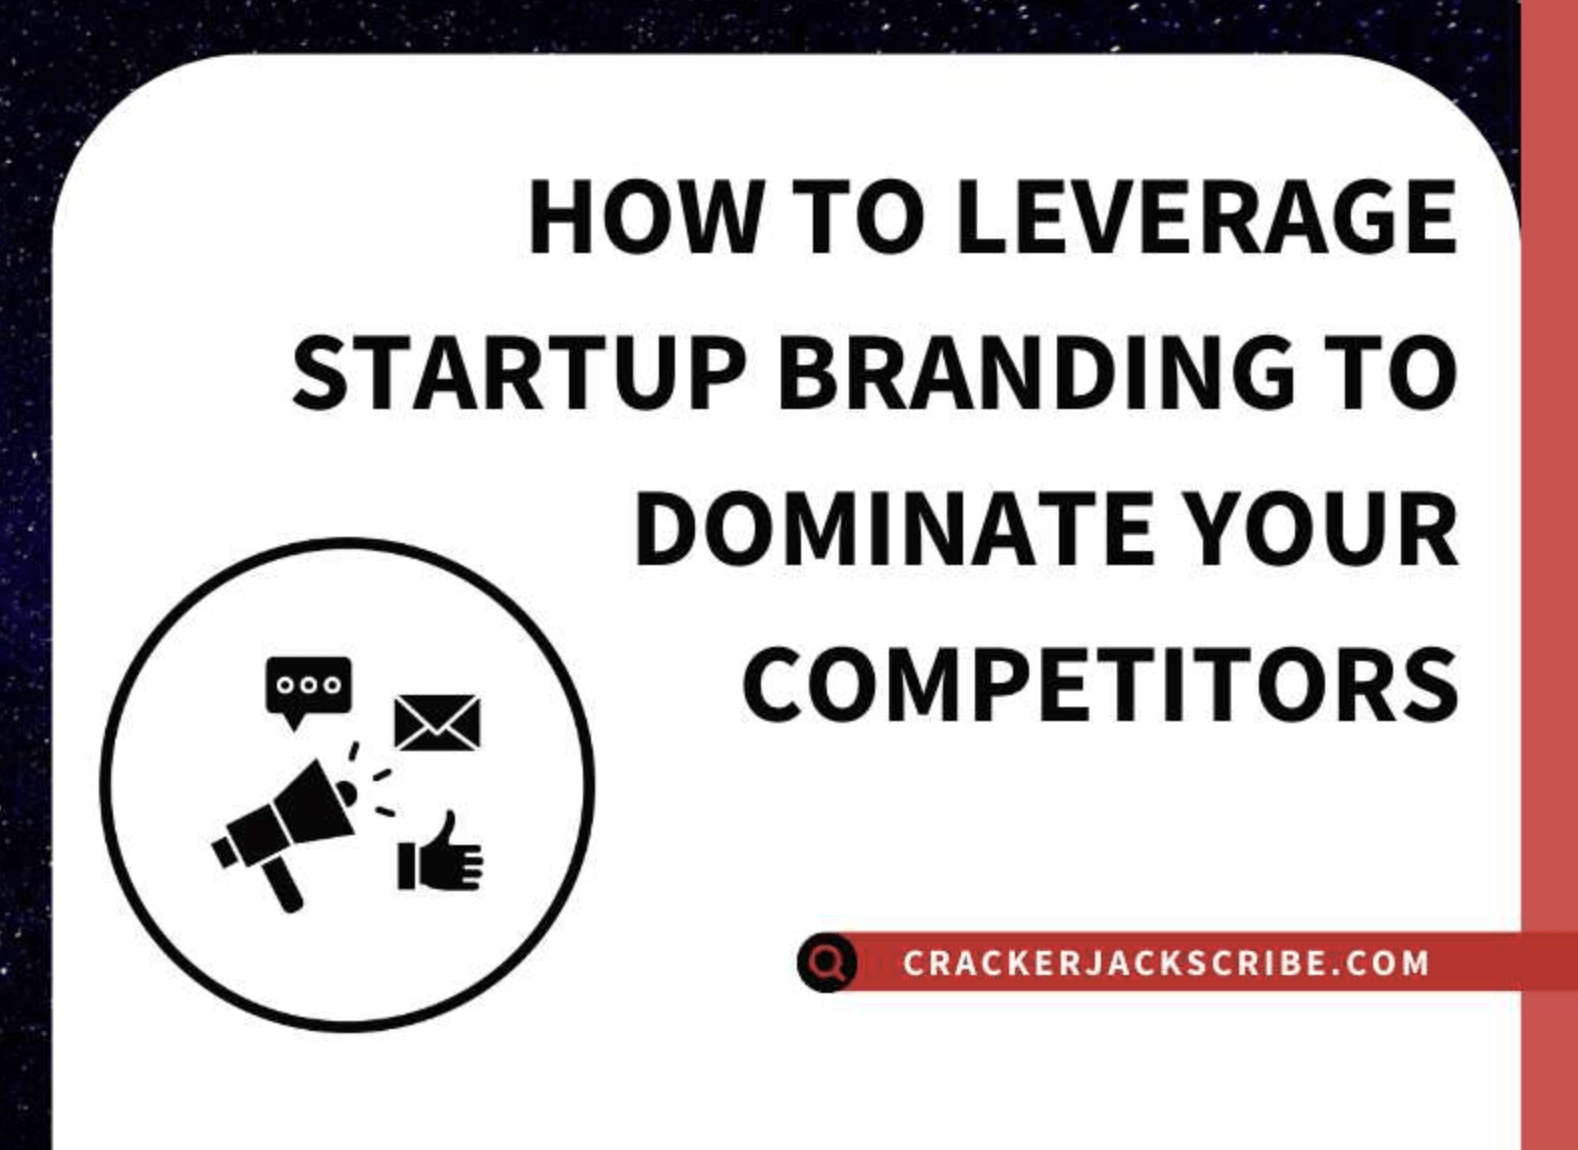 How to leverage startup branding